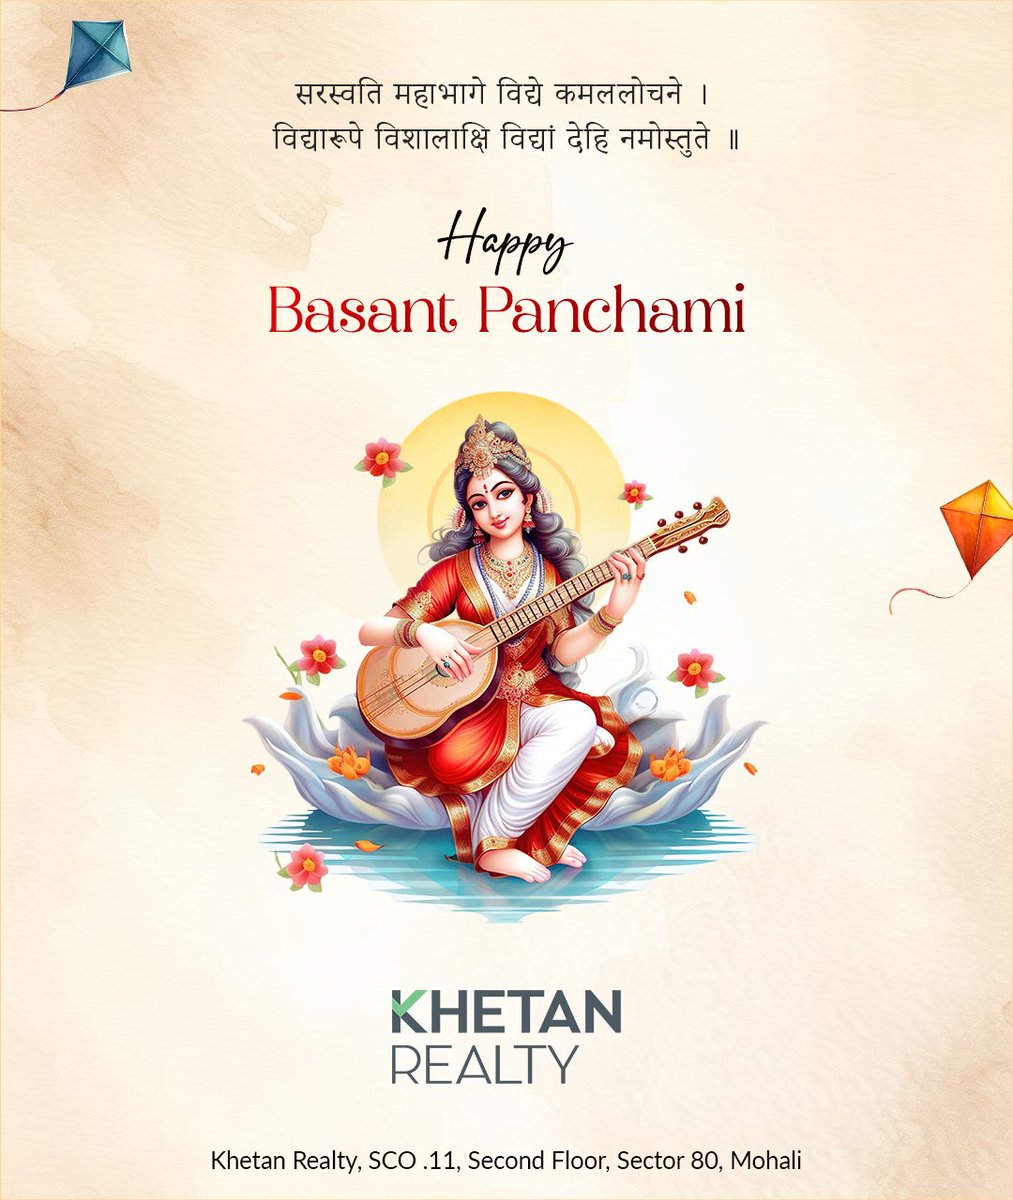 Celebrating the arrival of spring with reverence and joy on Basant Panchami. May the blessings of Goddess Saraswati illuminate our lives with wisdom and knowledge. #KhetanRealty #BasantPanchami #MaaSaraswati #Wisdom #Knowledge #Joy #Happiness #DivineBlessings #SpringFestival